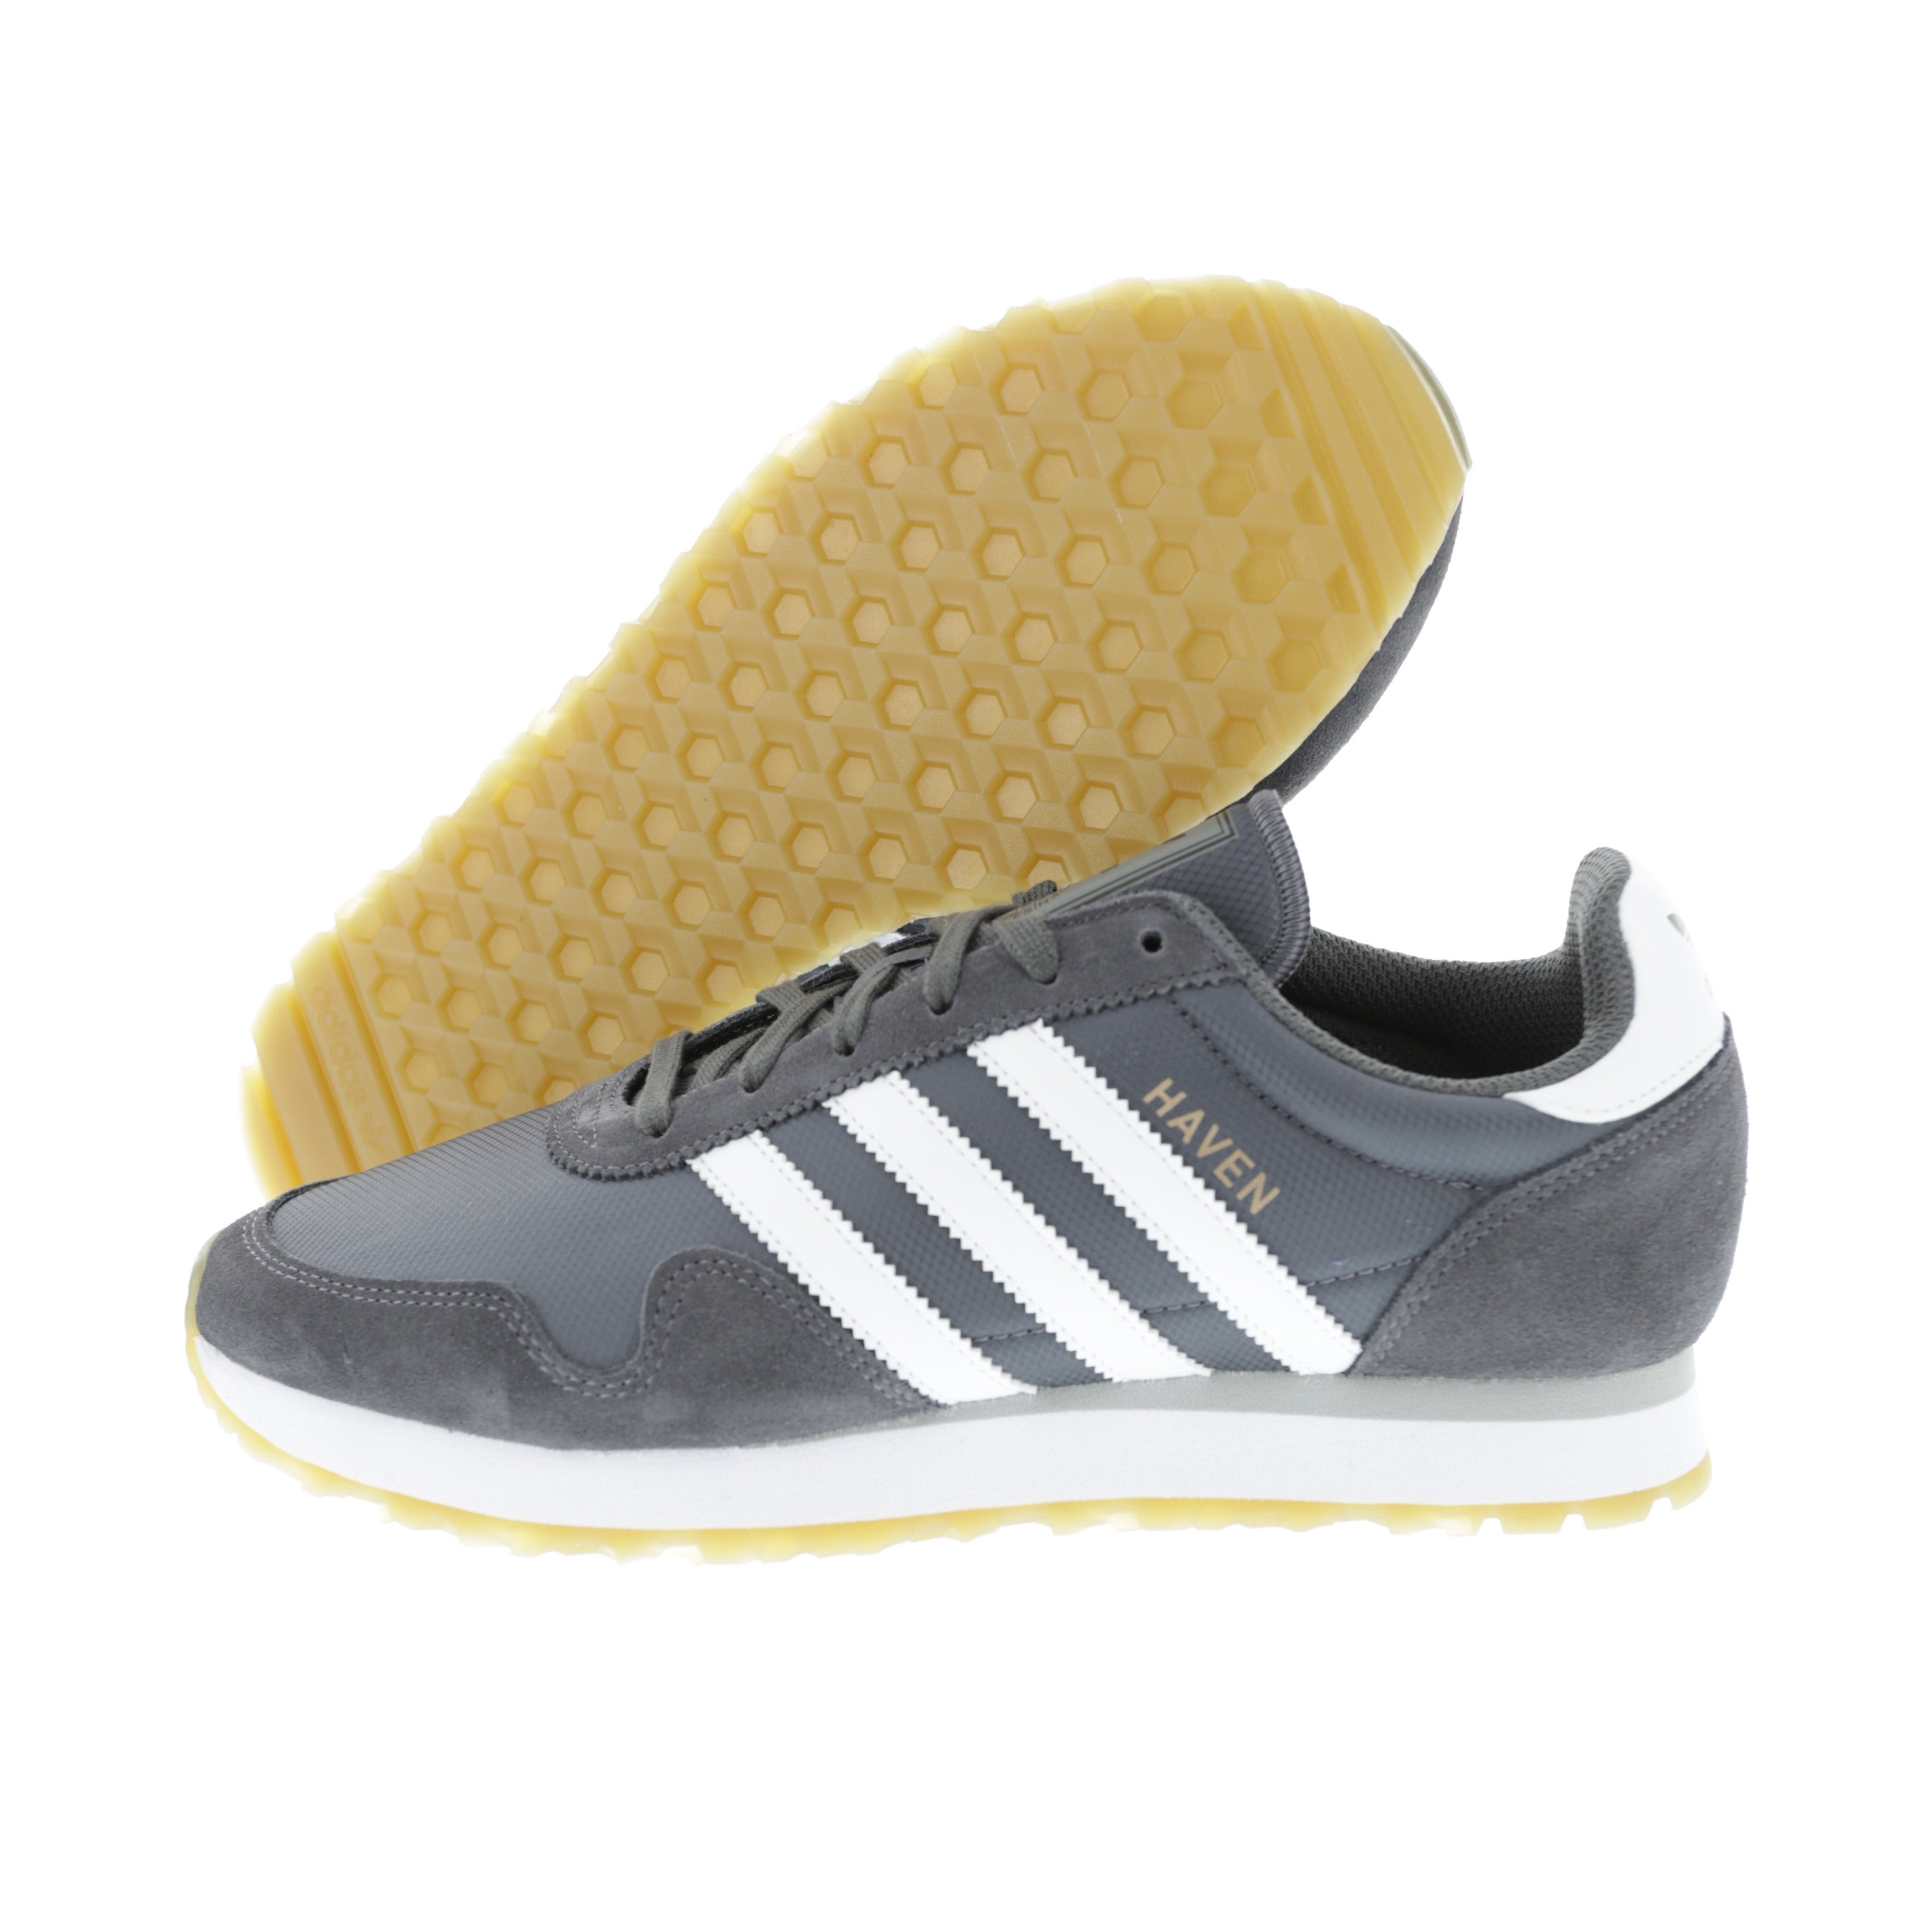 Adidas Originals Haven Grey/White/Gum | BY9715 | Culture Kings US